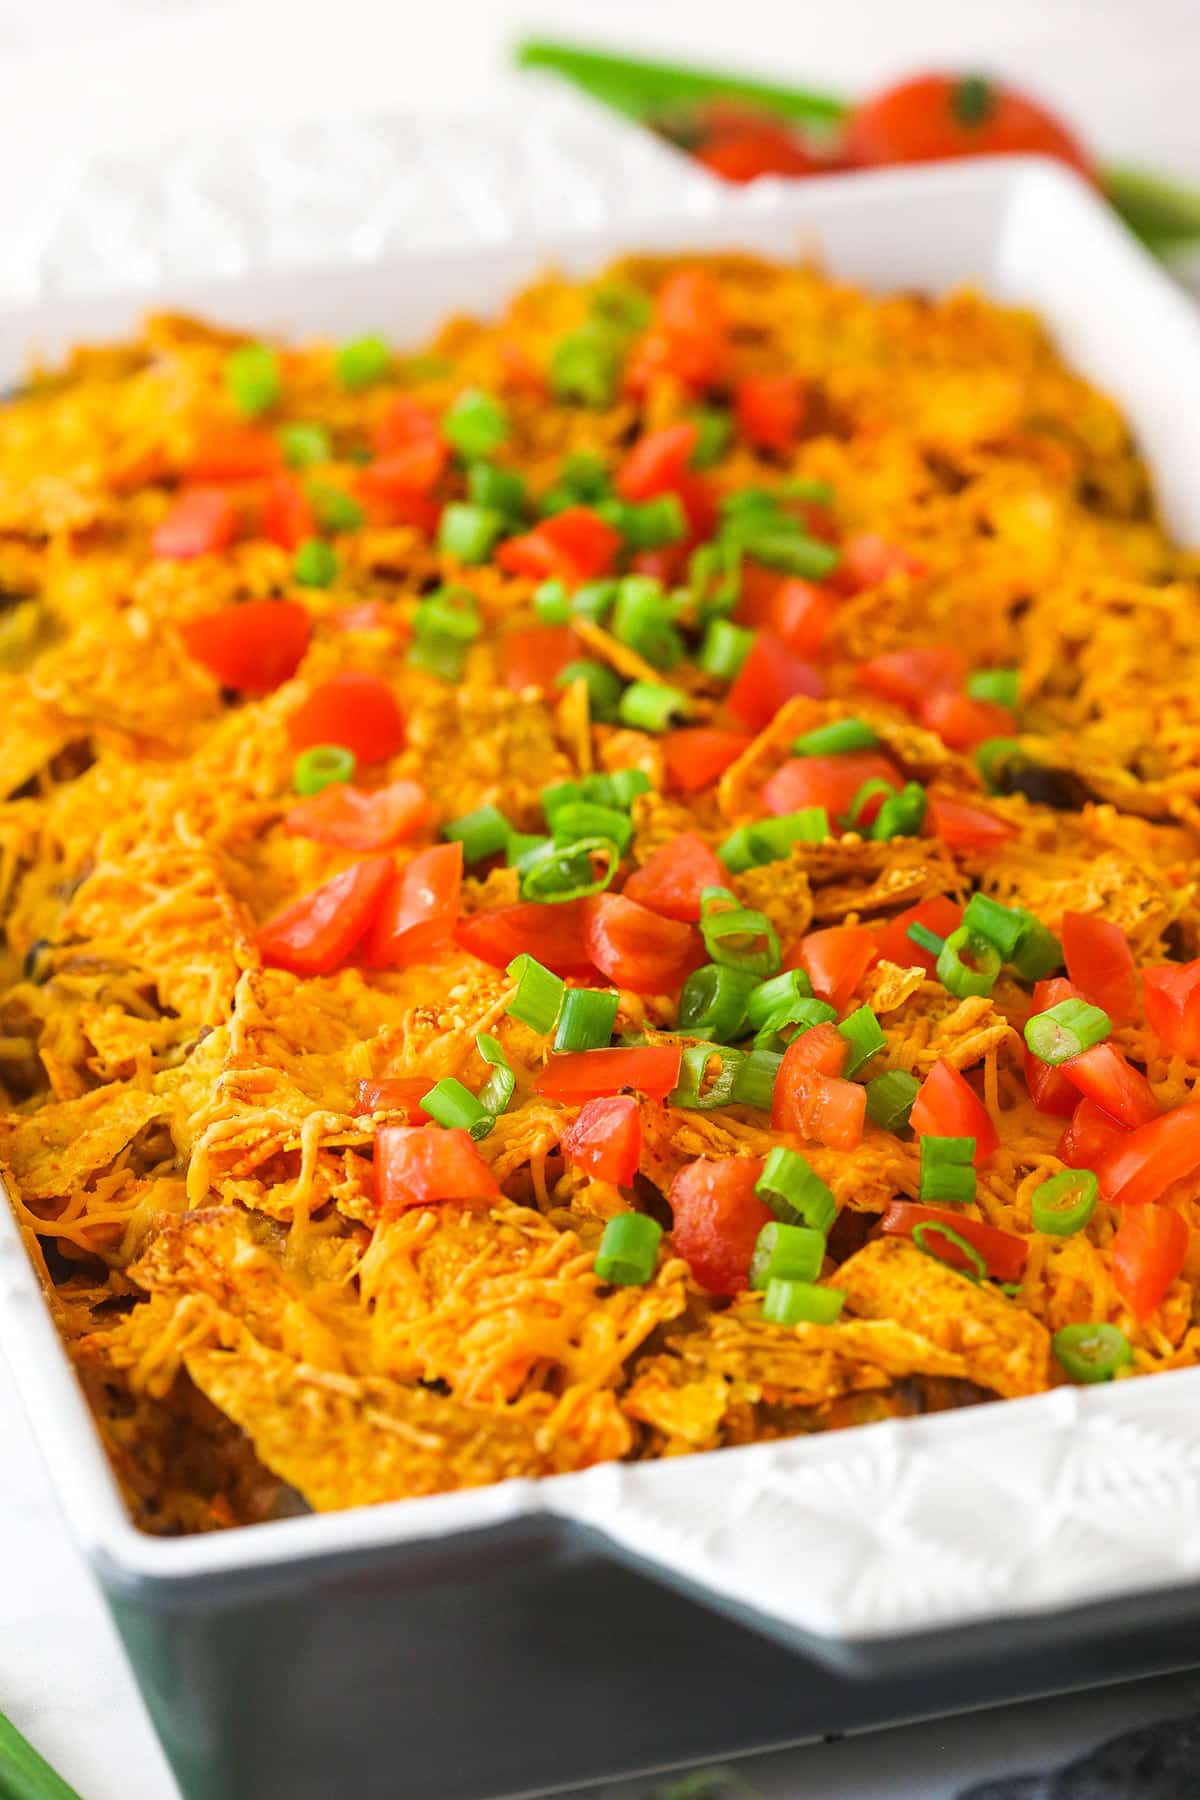 Dorito casserole in a baking pan garnished with tomatoes and green onions.